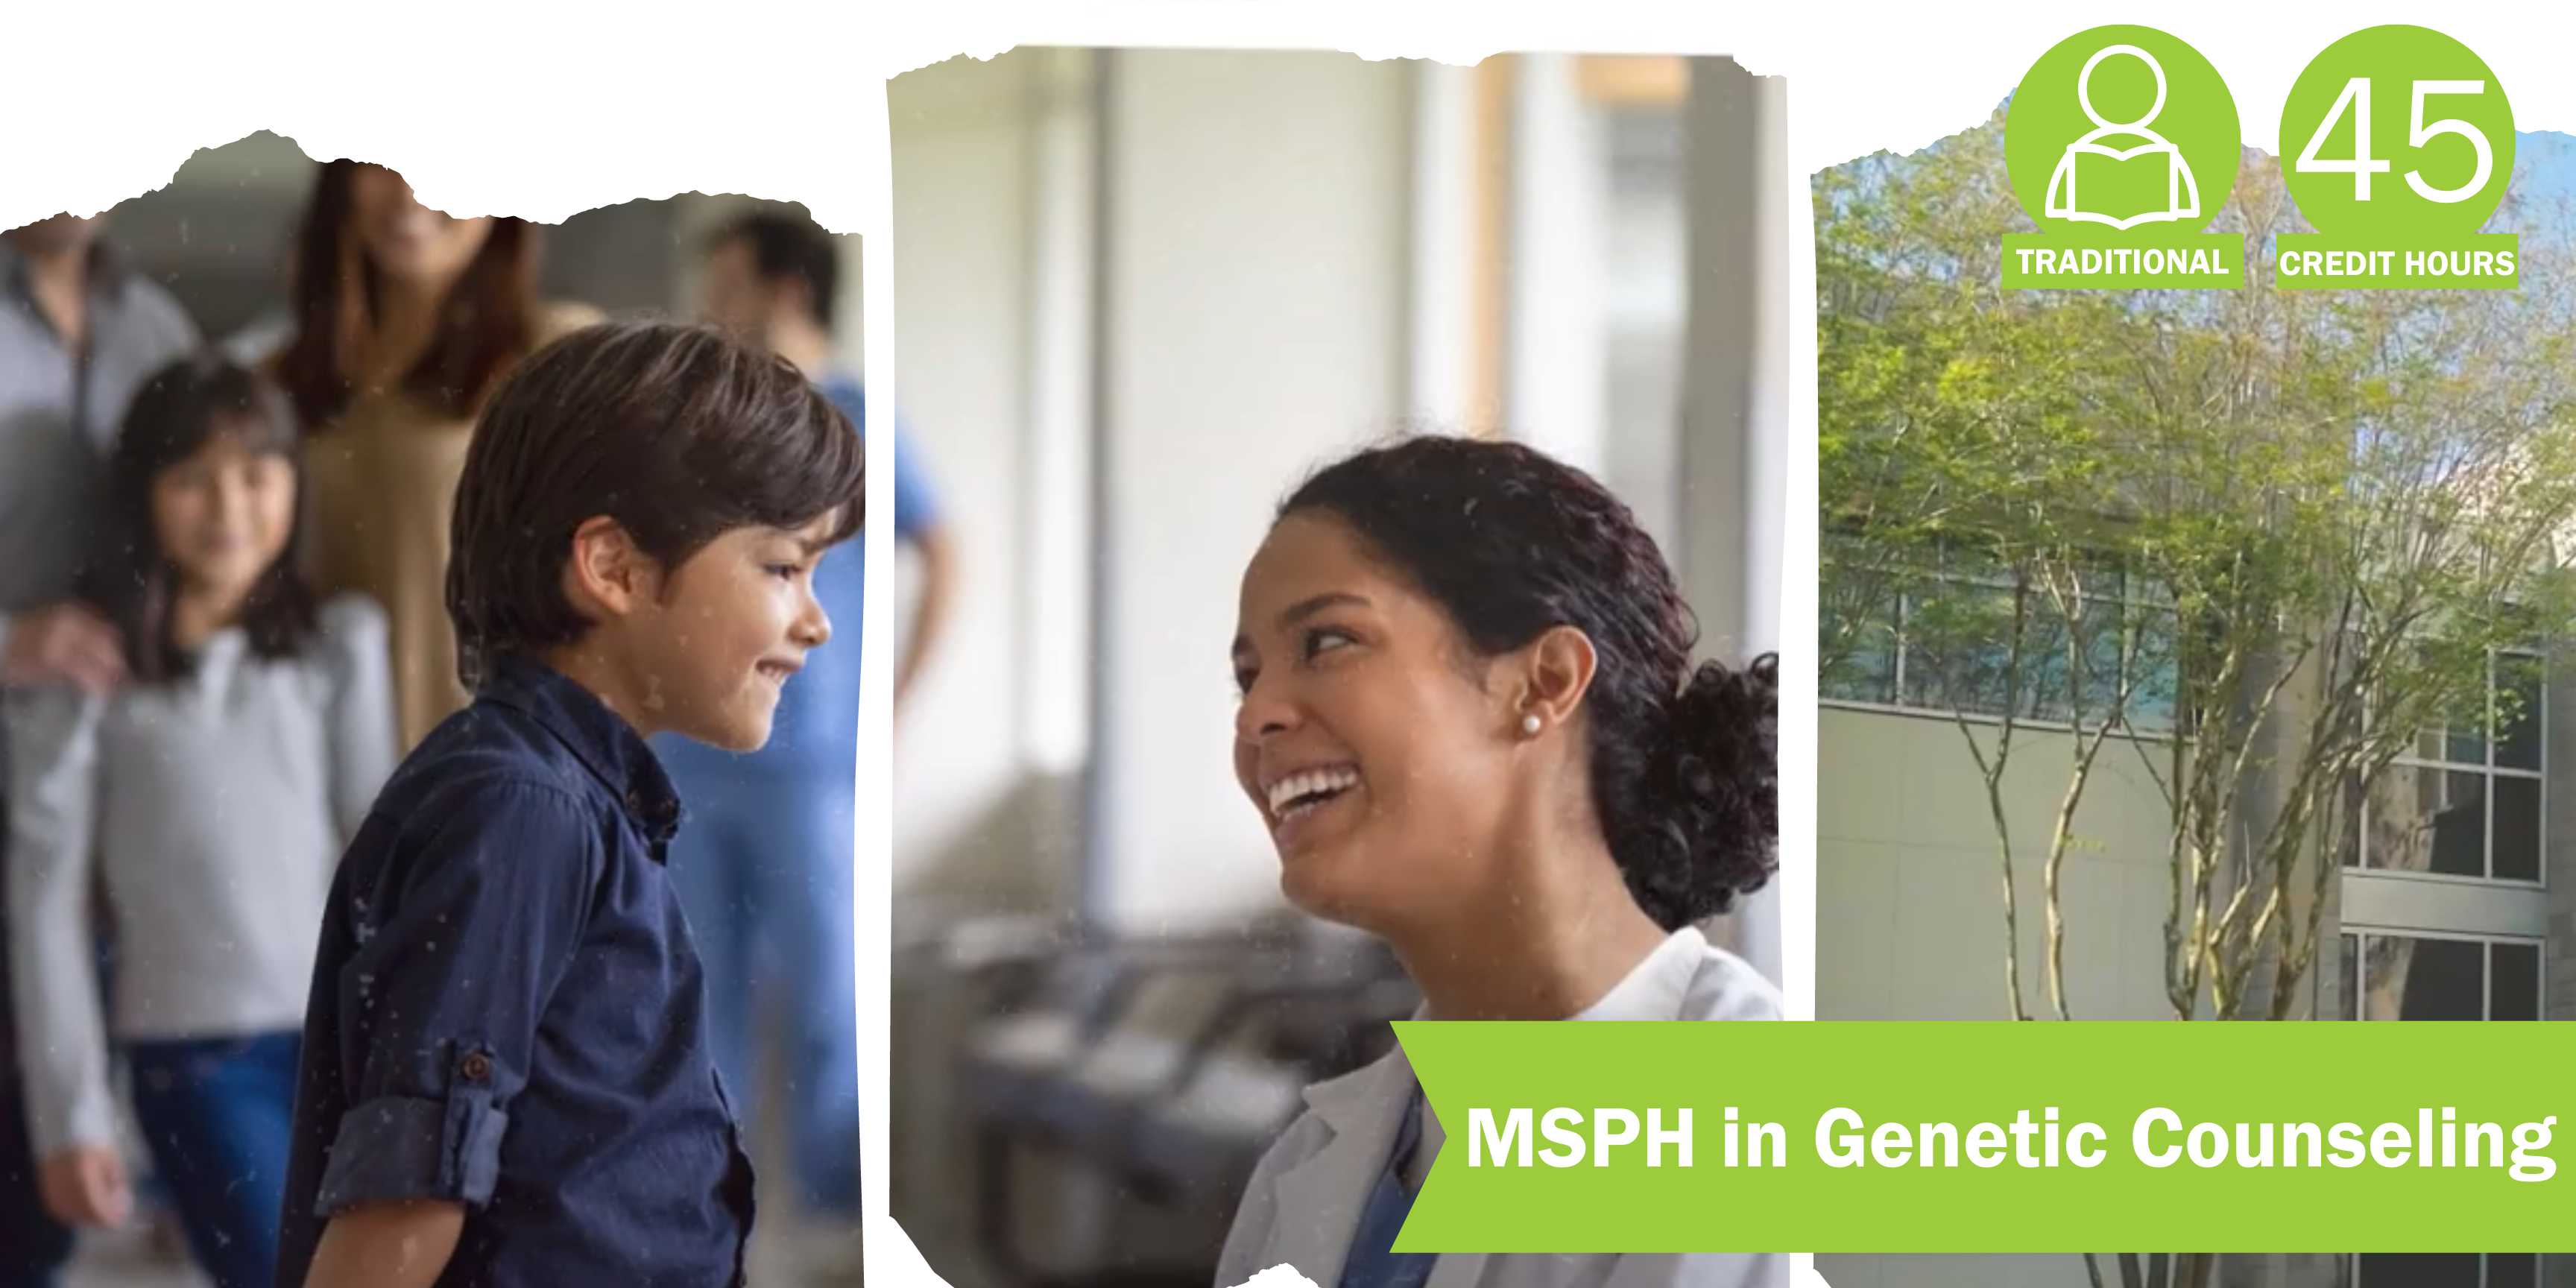 USF COPH: MSPH in Genetic Counseling